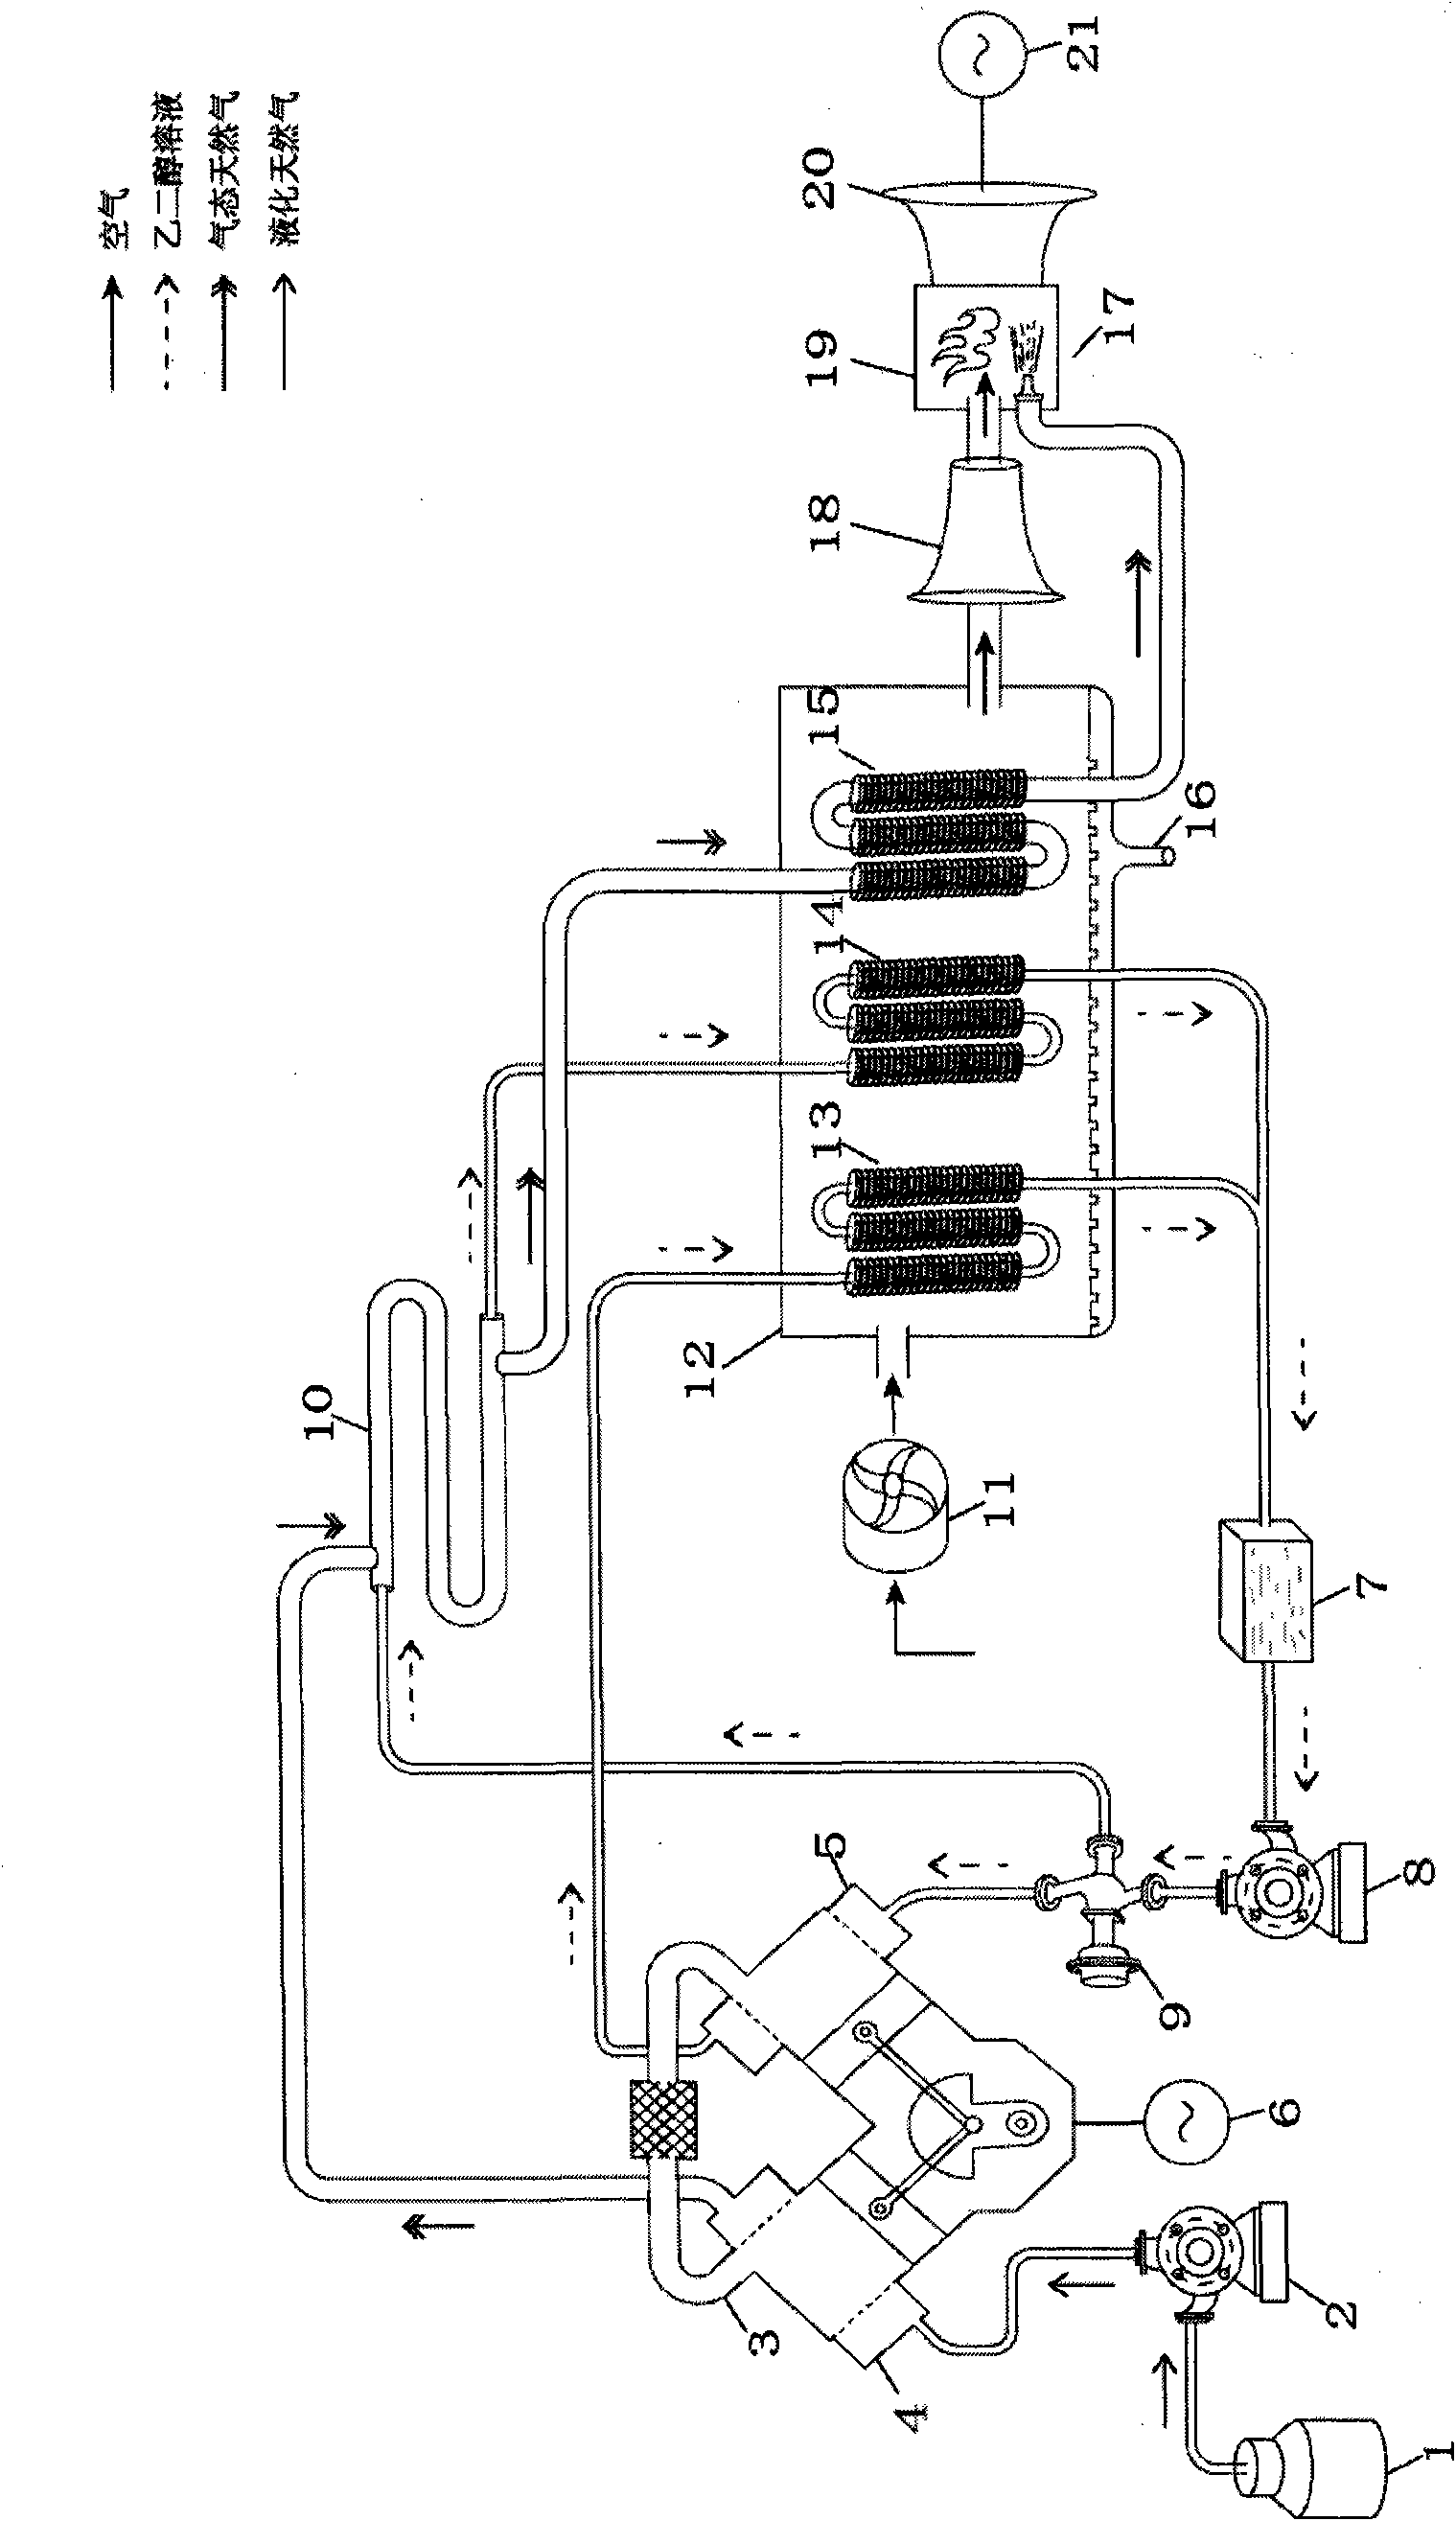 Combination system of stirling engine and combustion gas turbine utilizing liquefied natural gas